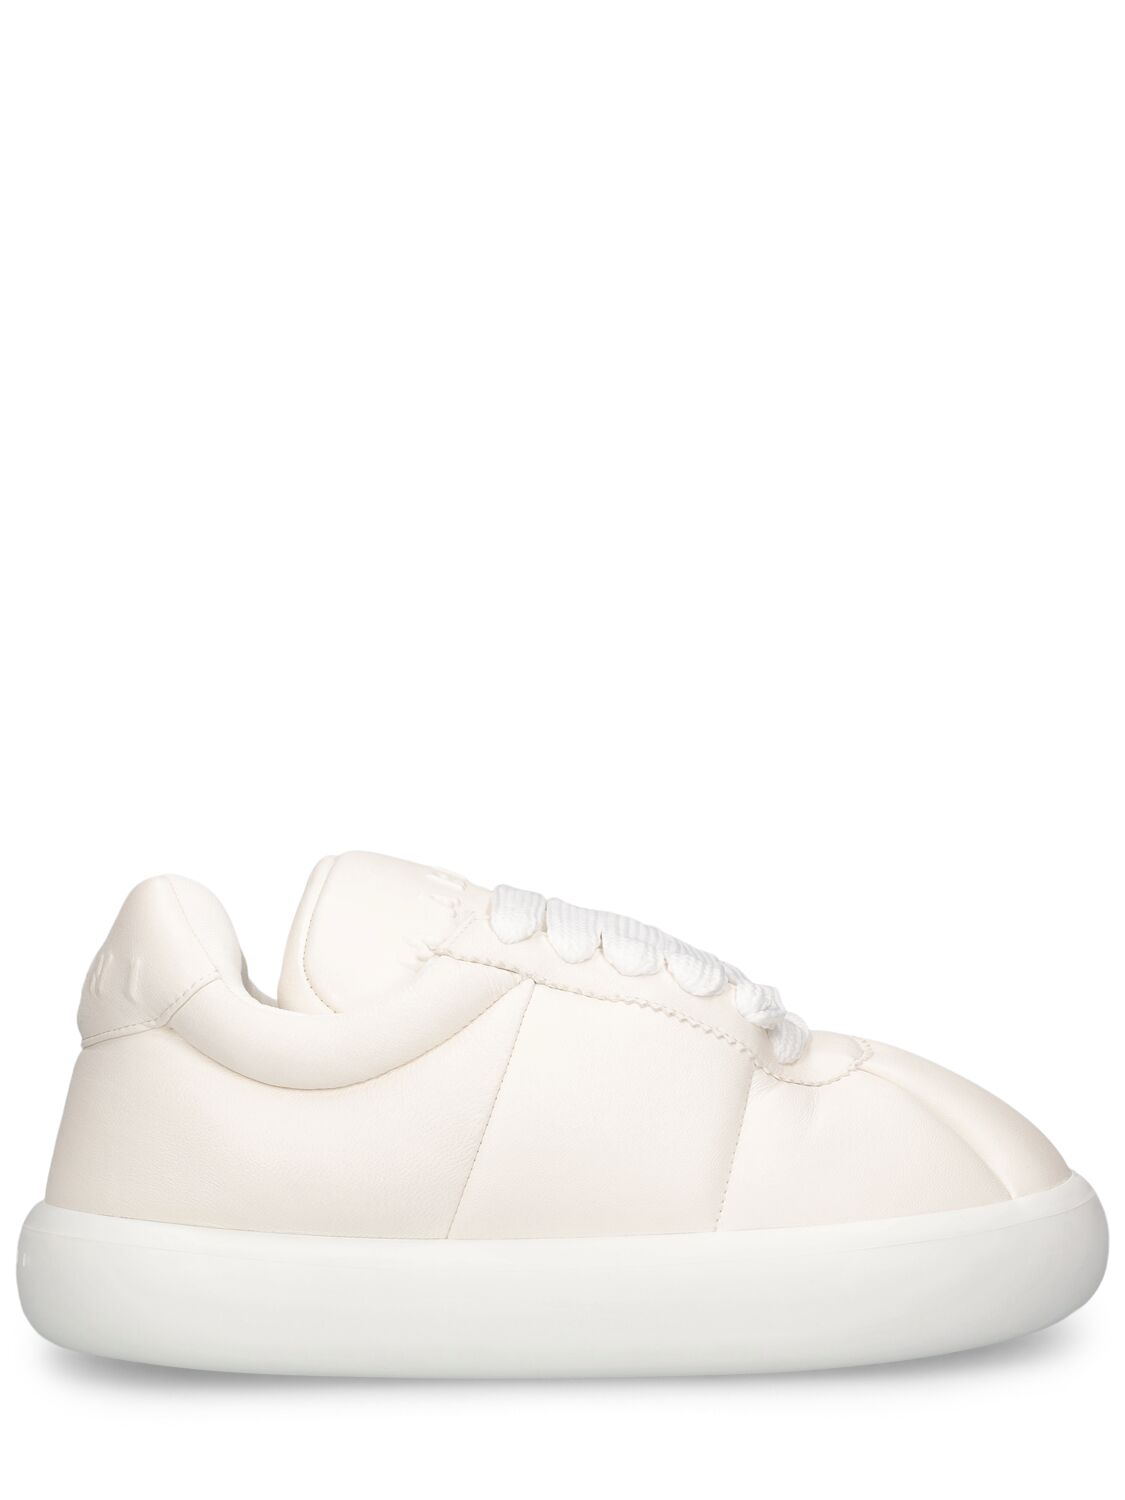 Marni Chunky Soft Leather Low Top Trainers In White